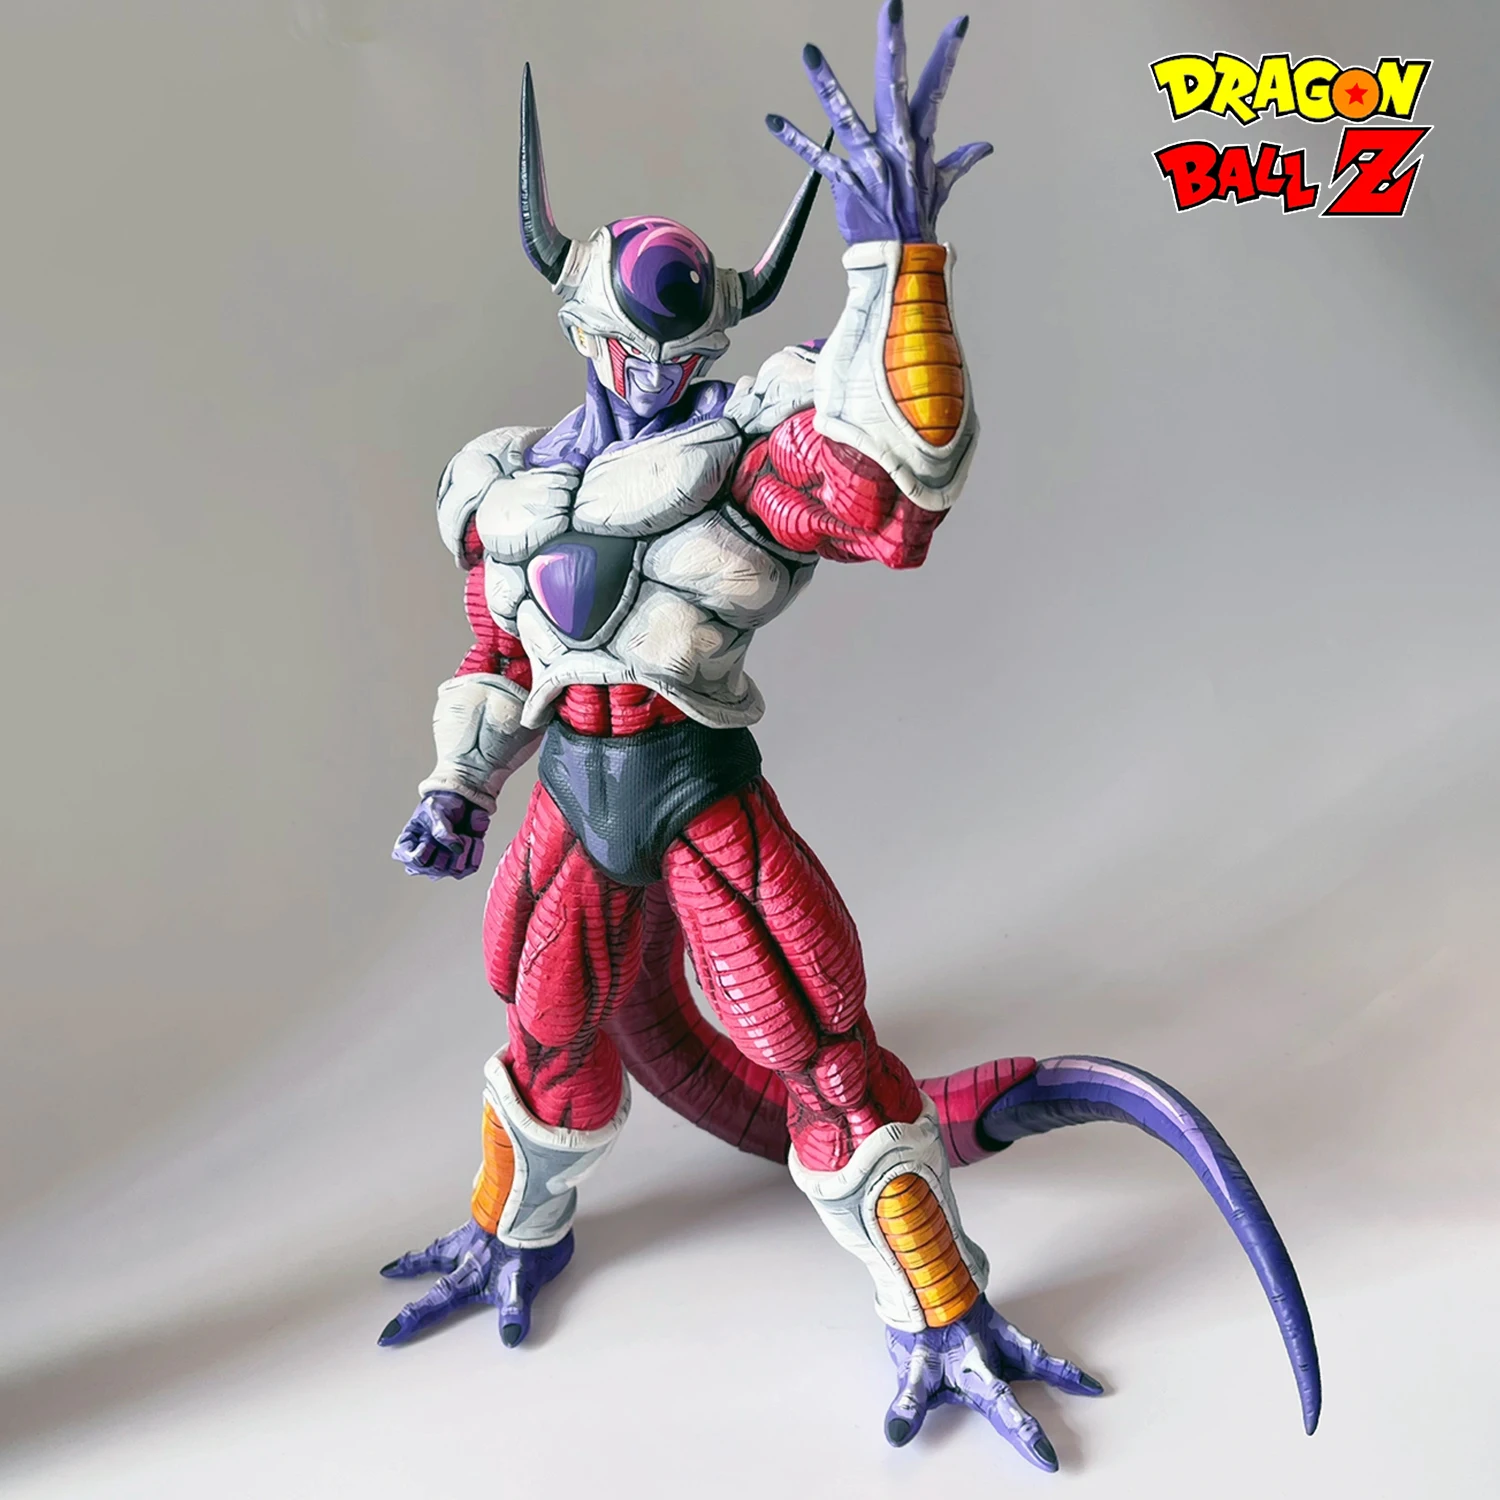 

37cm Dragon Ball Z Frieza Second Form GK Anime Action Figure DBZ Figurine PVC Statue Collectible Model Doll Room Decoration Toys